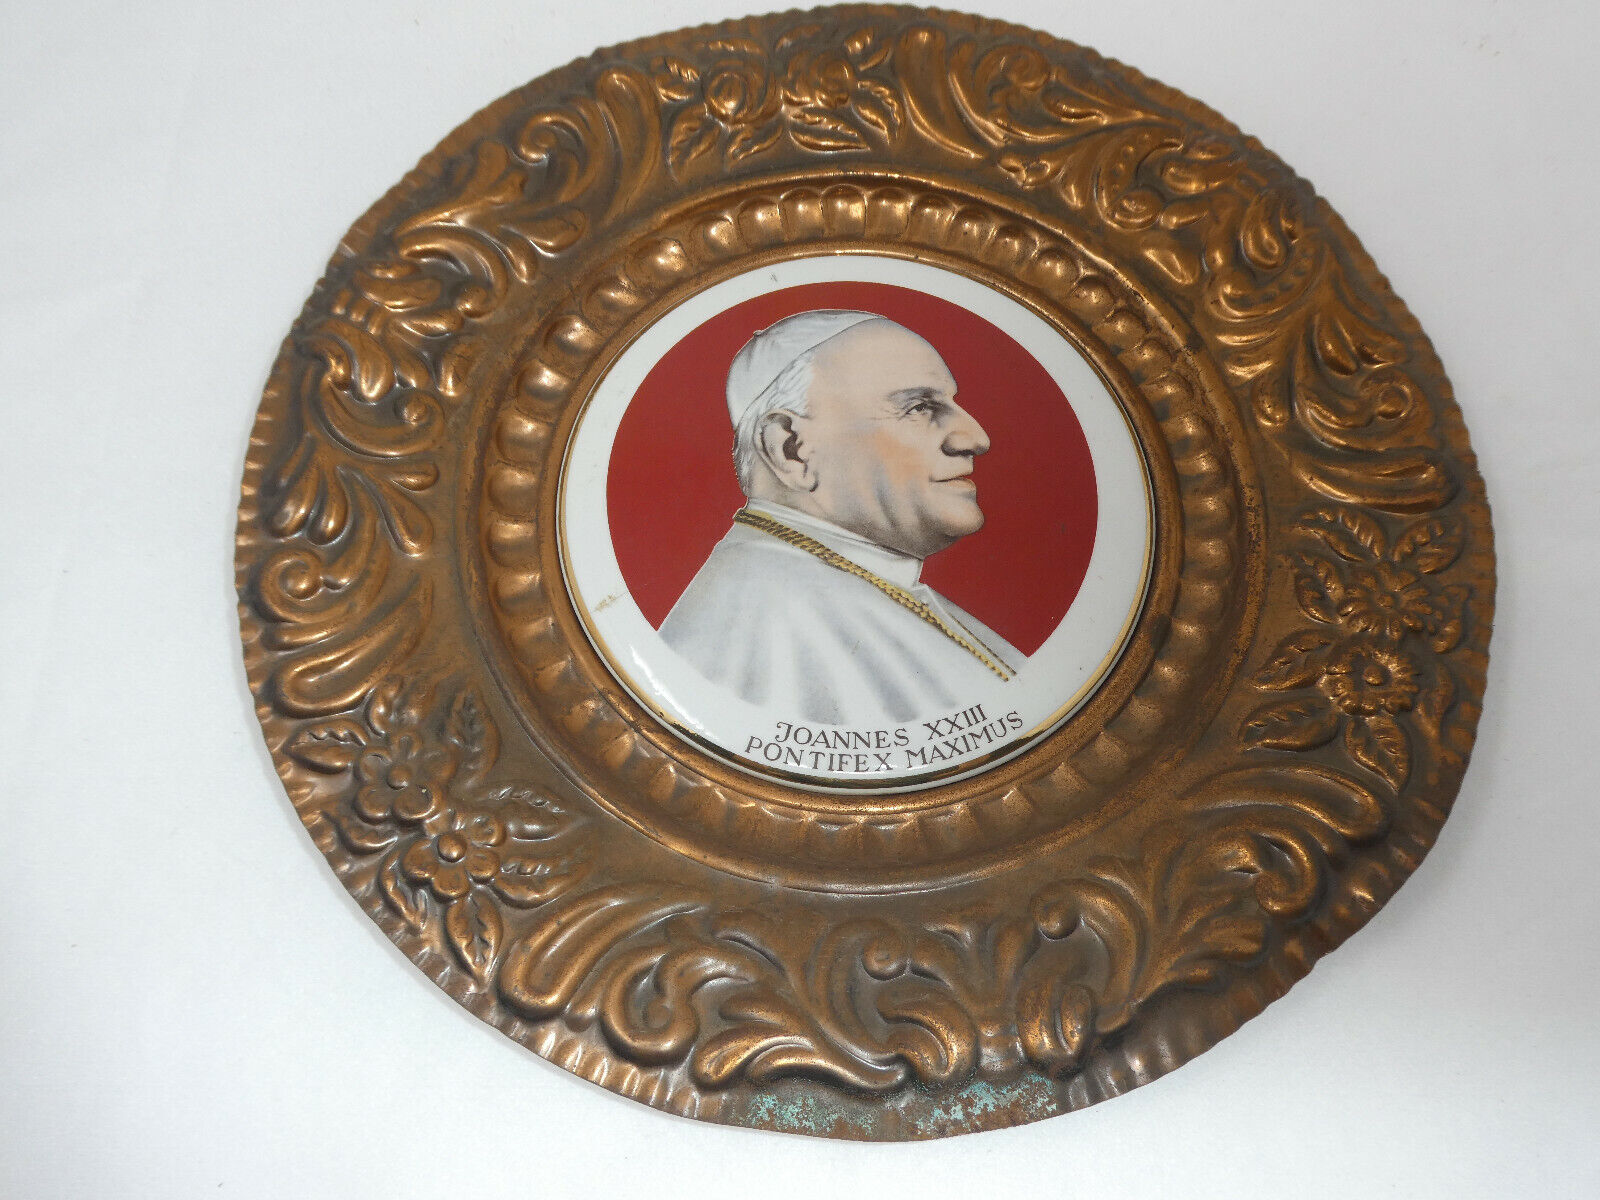 VINTAGE MID-CENTURY POPE JOANNES XXIII HAMMERED COPPER & CERAMIC WALL PLAQUE